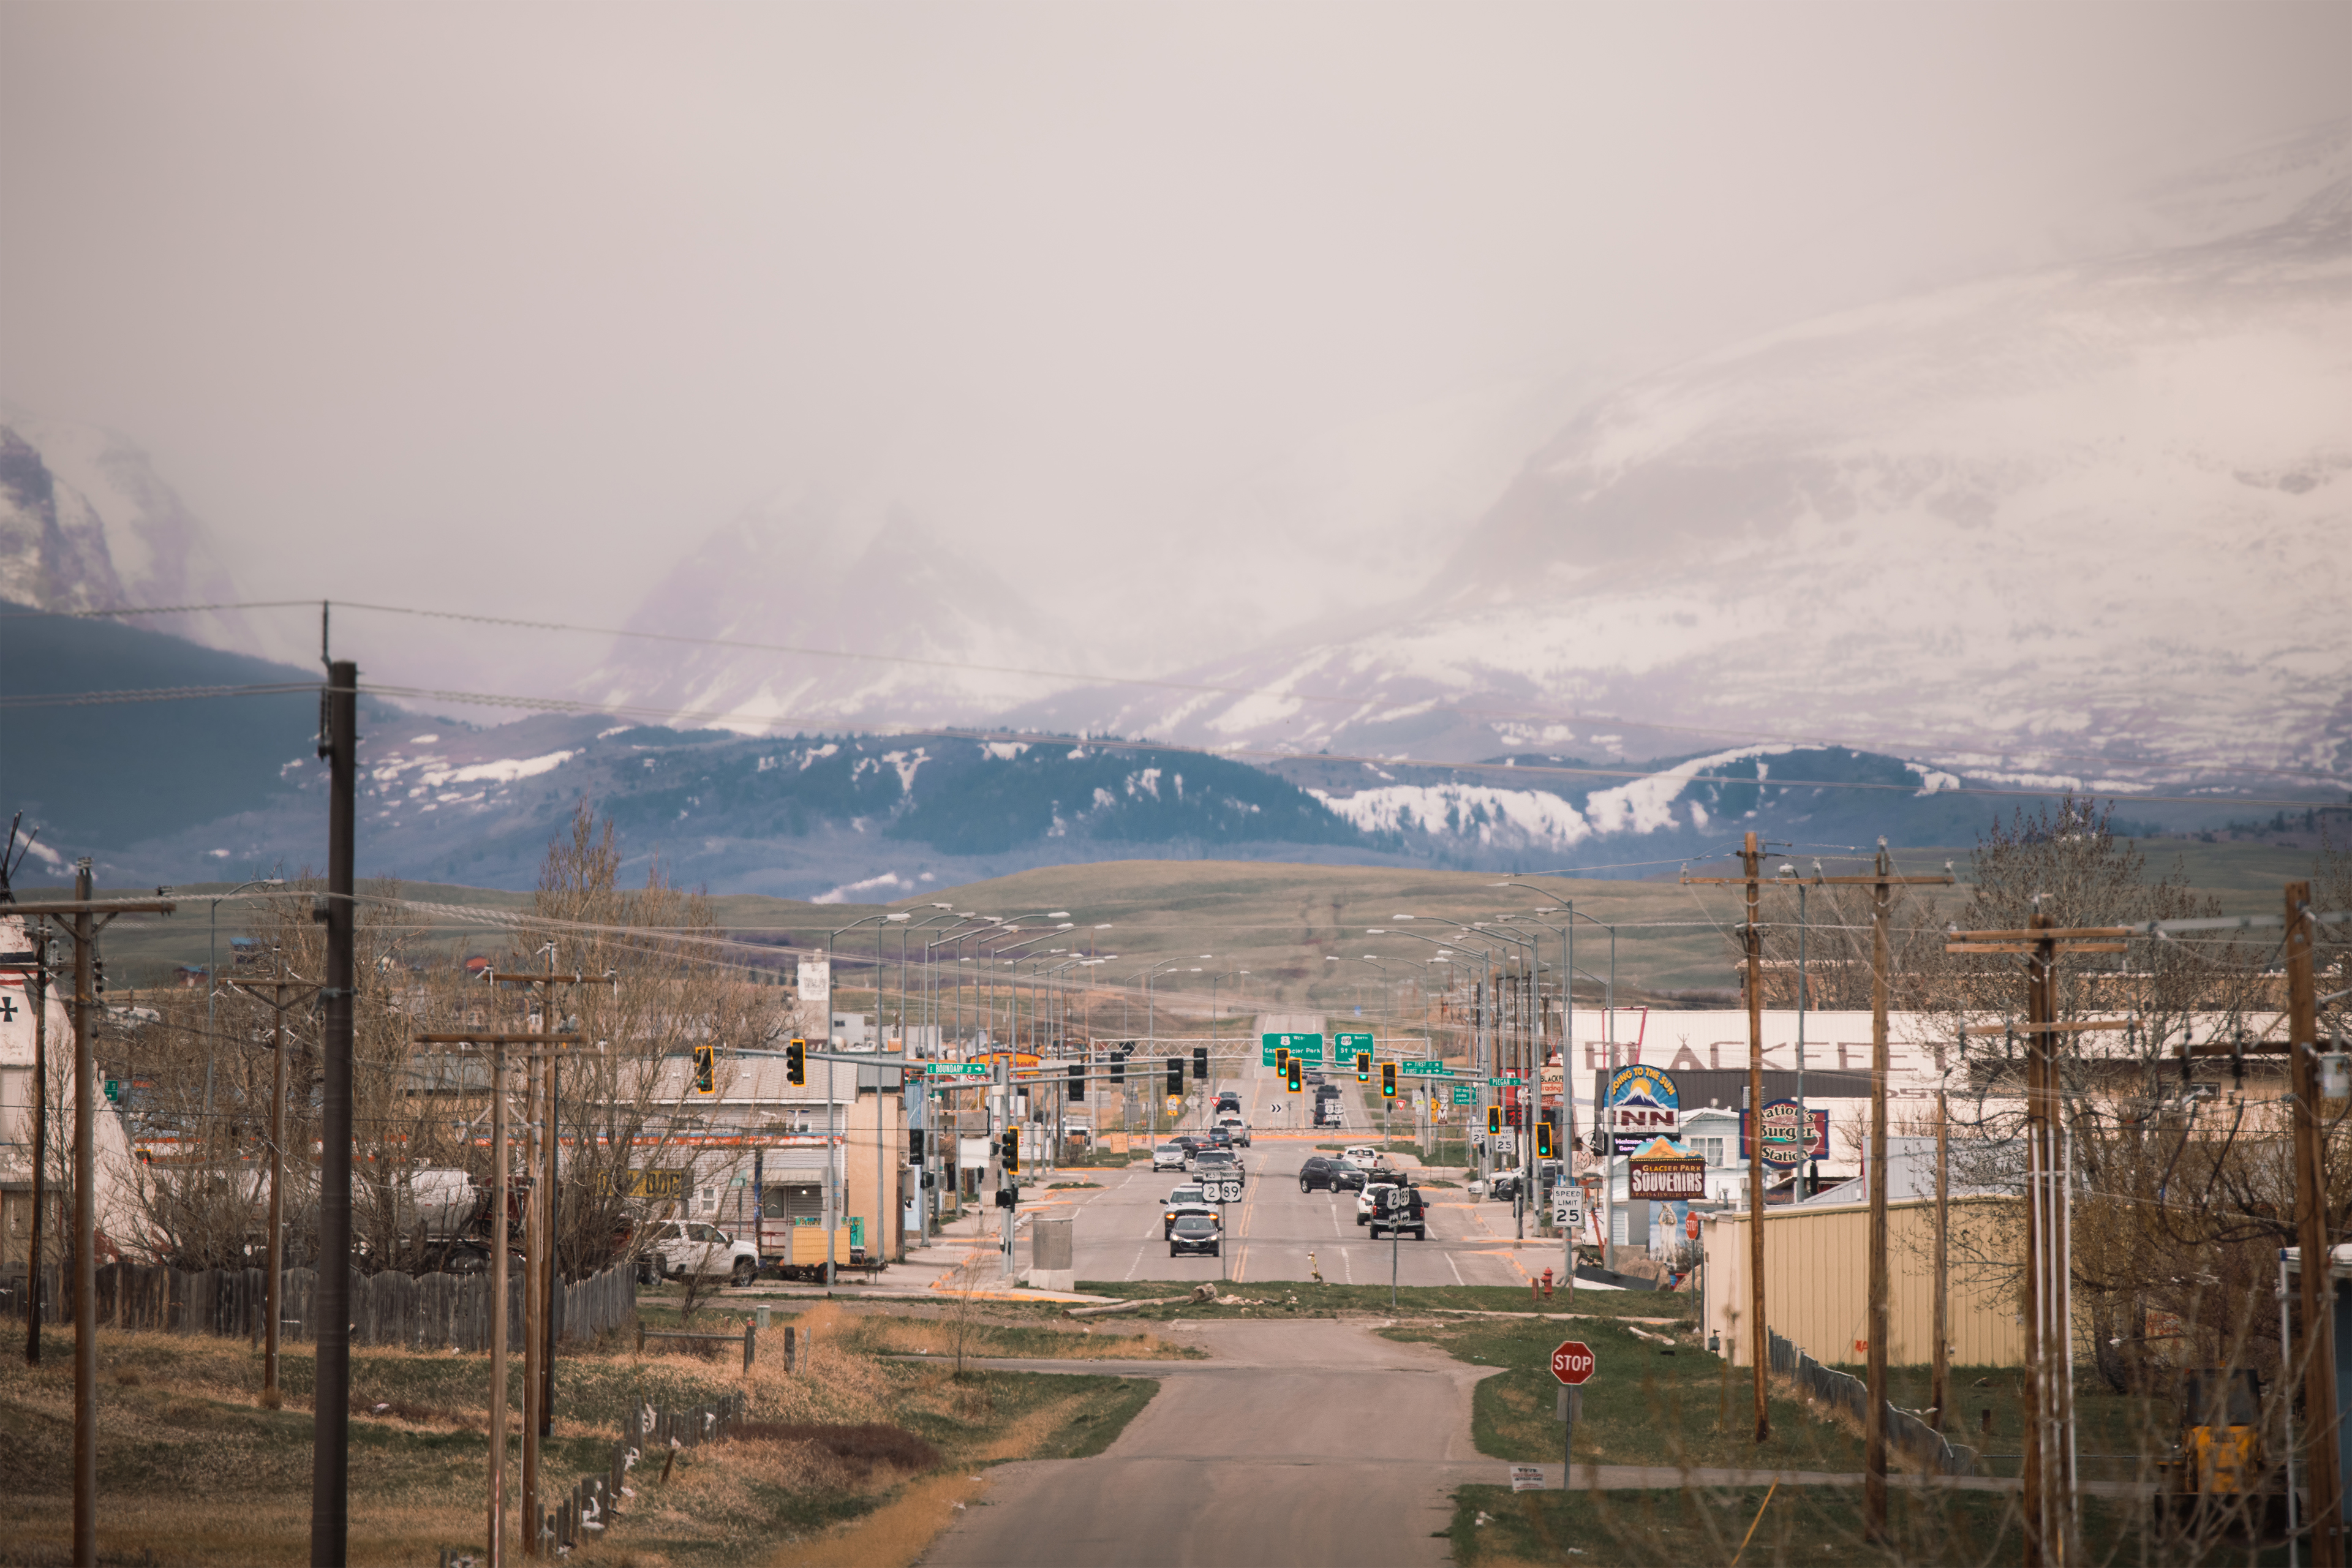 A landscape photo shows a road in Browning, Montana with mountains towering behind it in the background.